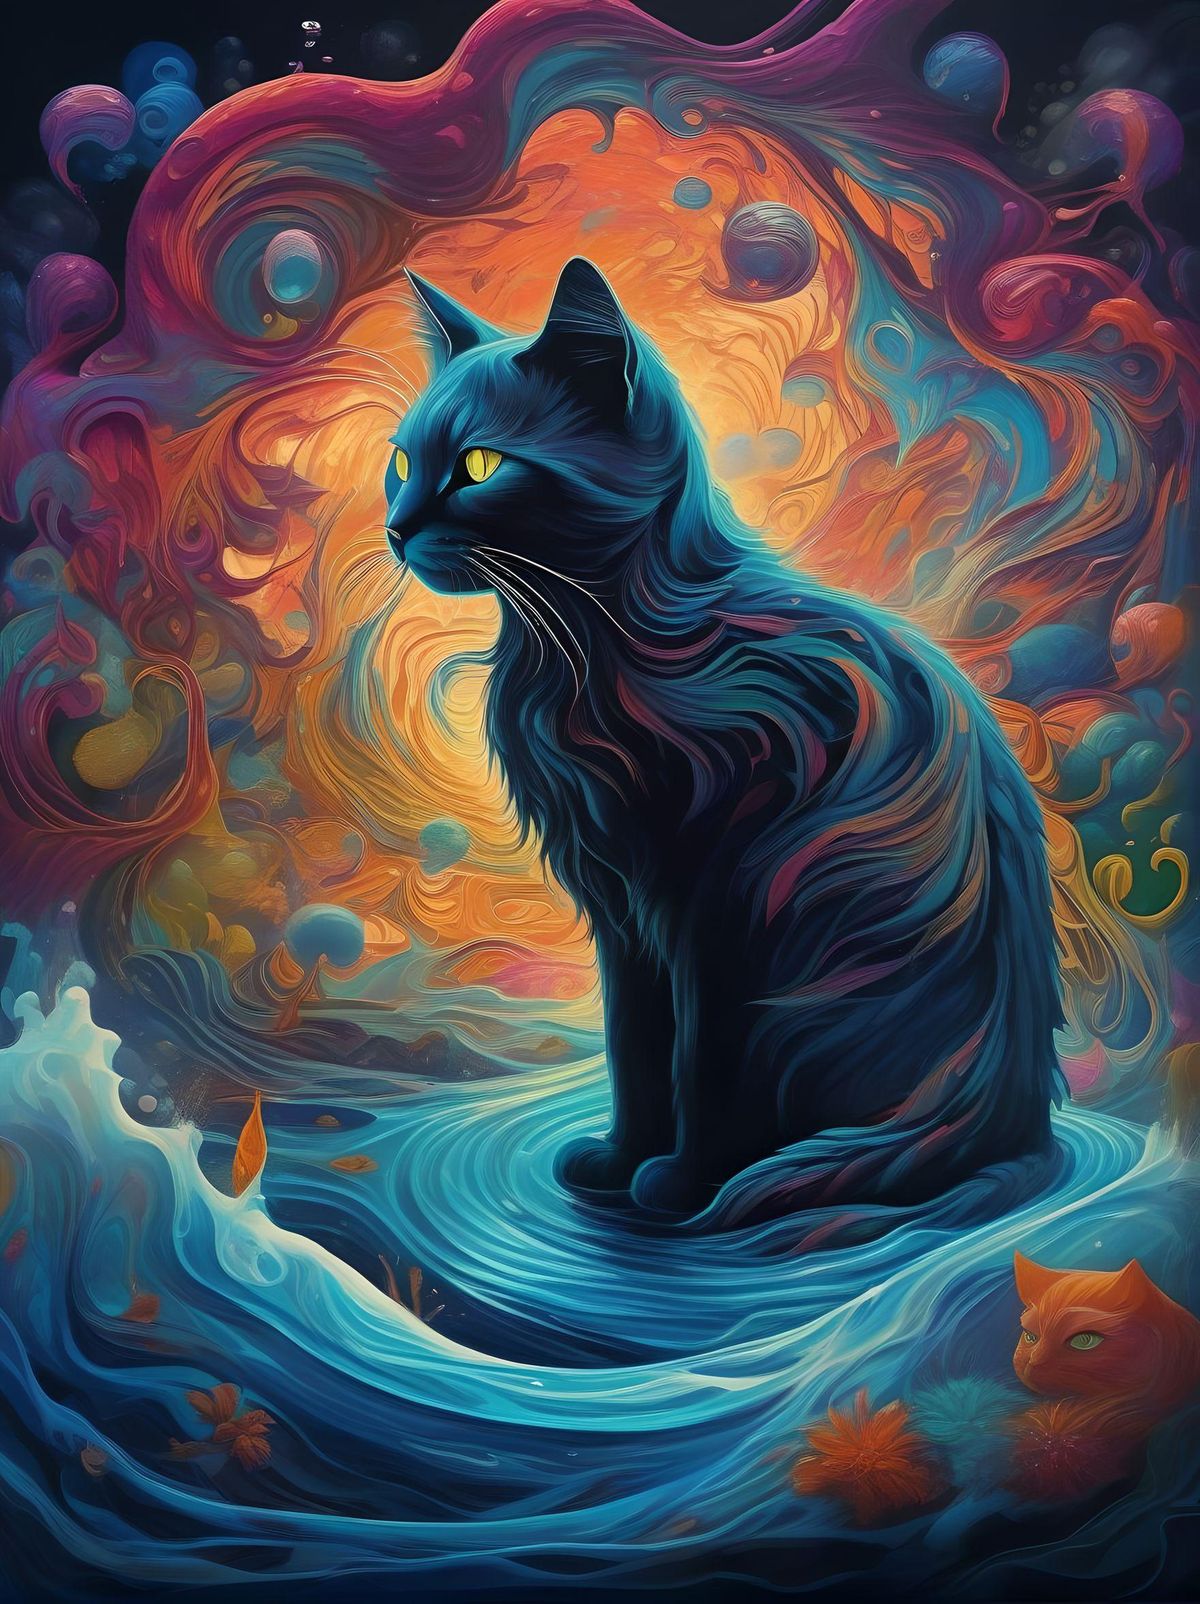 horror-themed psychedelic style (Masterpiece, high quality, best quality, official art, beauty and aesthetics:1.2),water element,a cat made of water,water,(cat:1.2),  vibrant colors, swirling patterns, abstract forms, surreal, trippy . eerie, unsettling, dark, spooky, suspenseful, grim, highly detailed